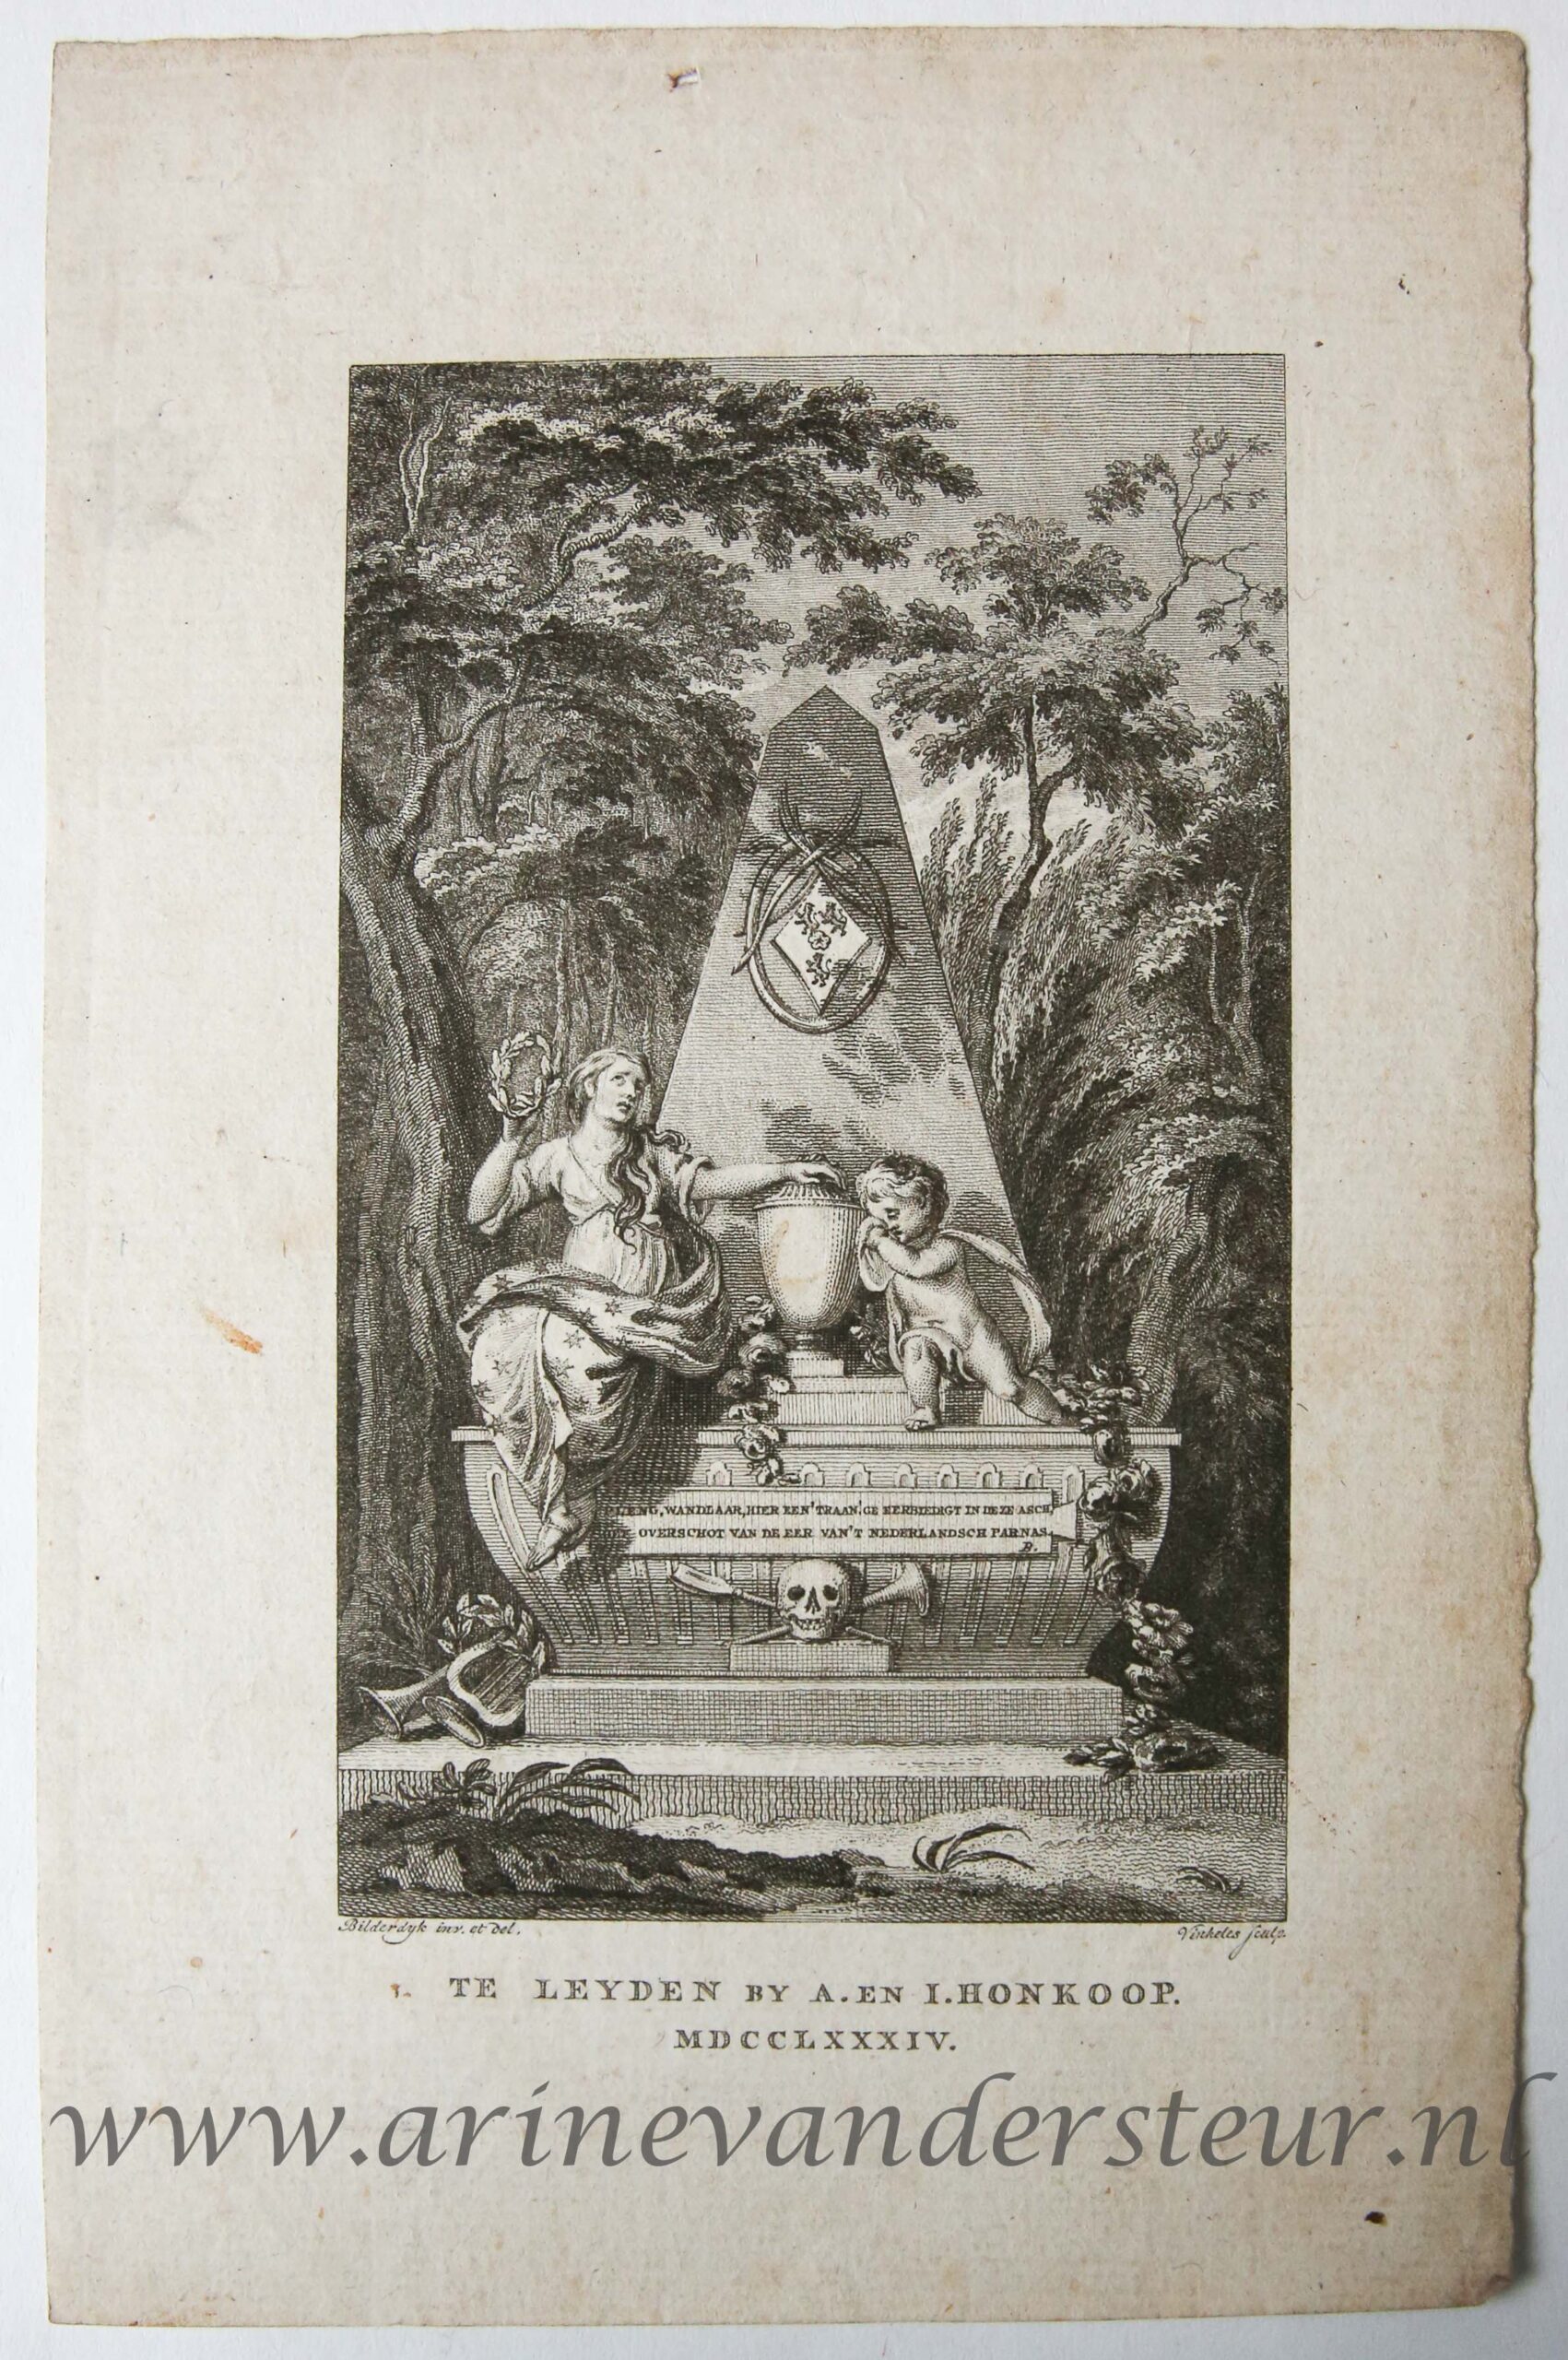 [Antique title page, 1784] Monument for Juliana Cornelia de Lannoy / Gedenkzuil voor Juliana Cornelia de Lannoy, published 1784, 1 p.